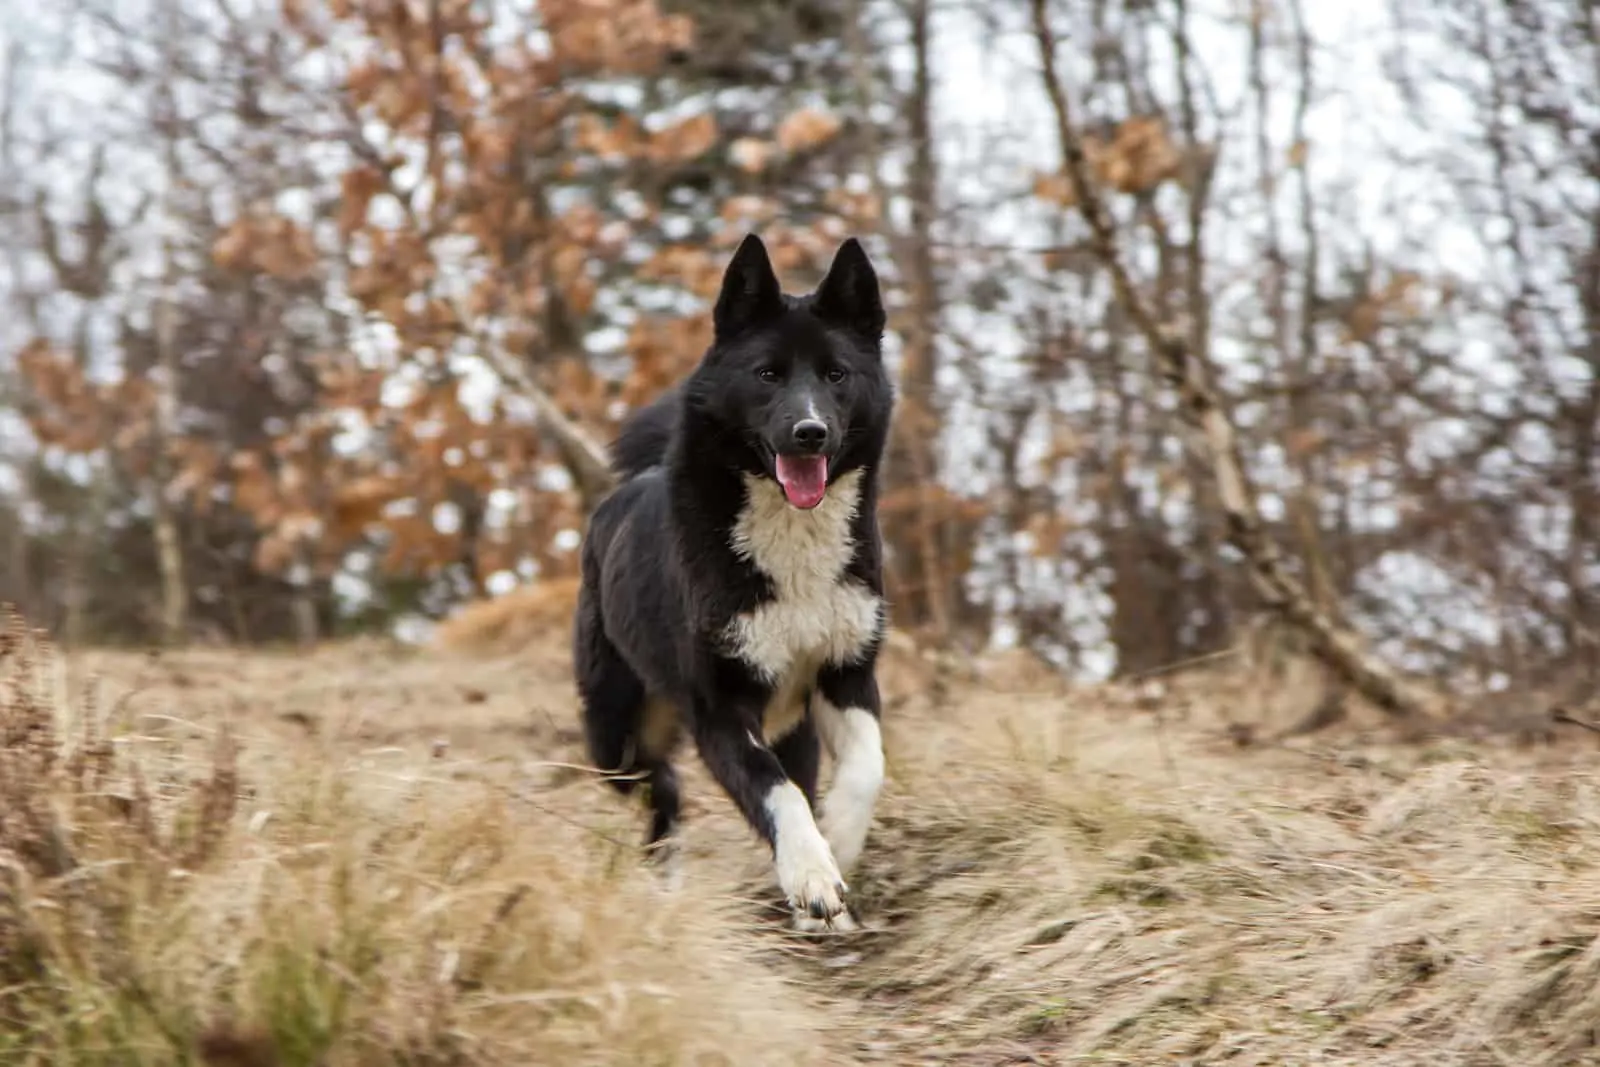 russo-european laika running in the wood